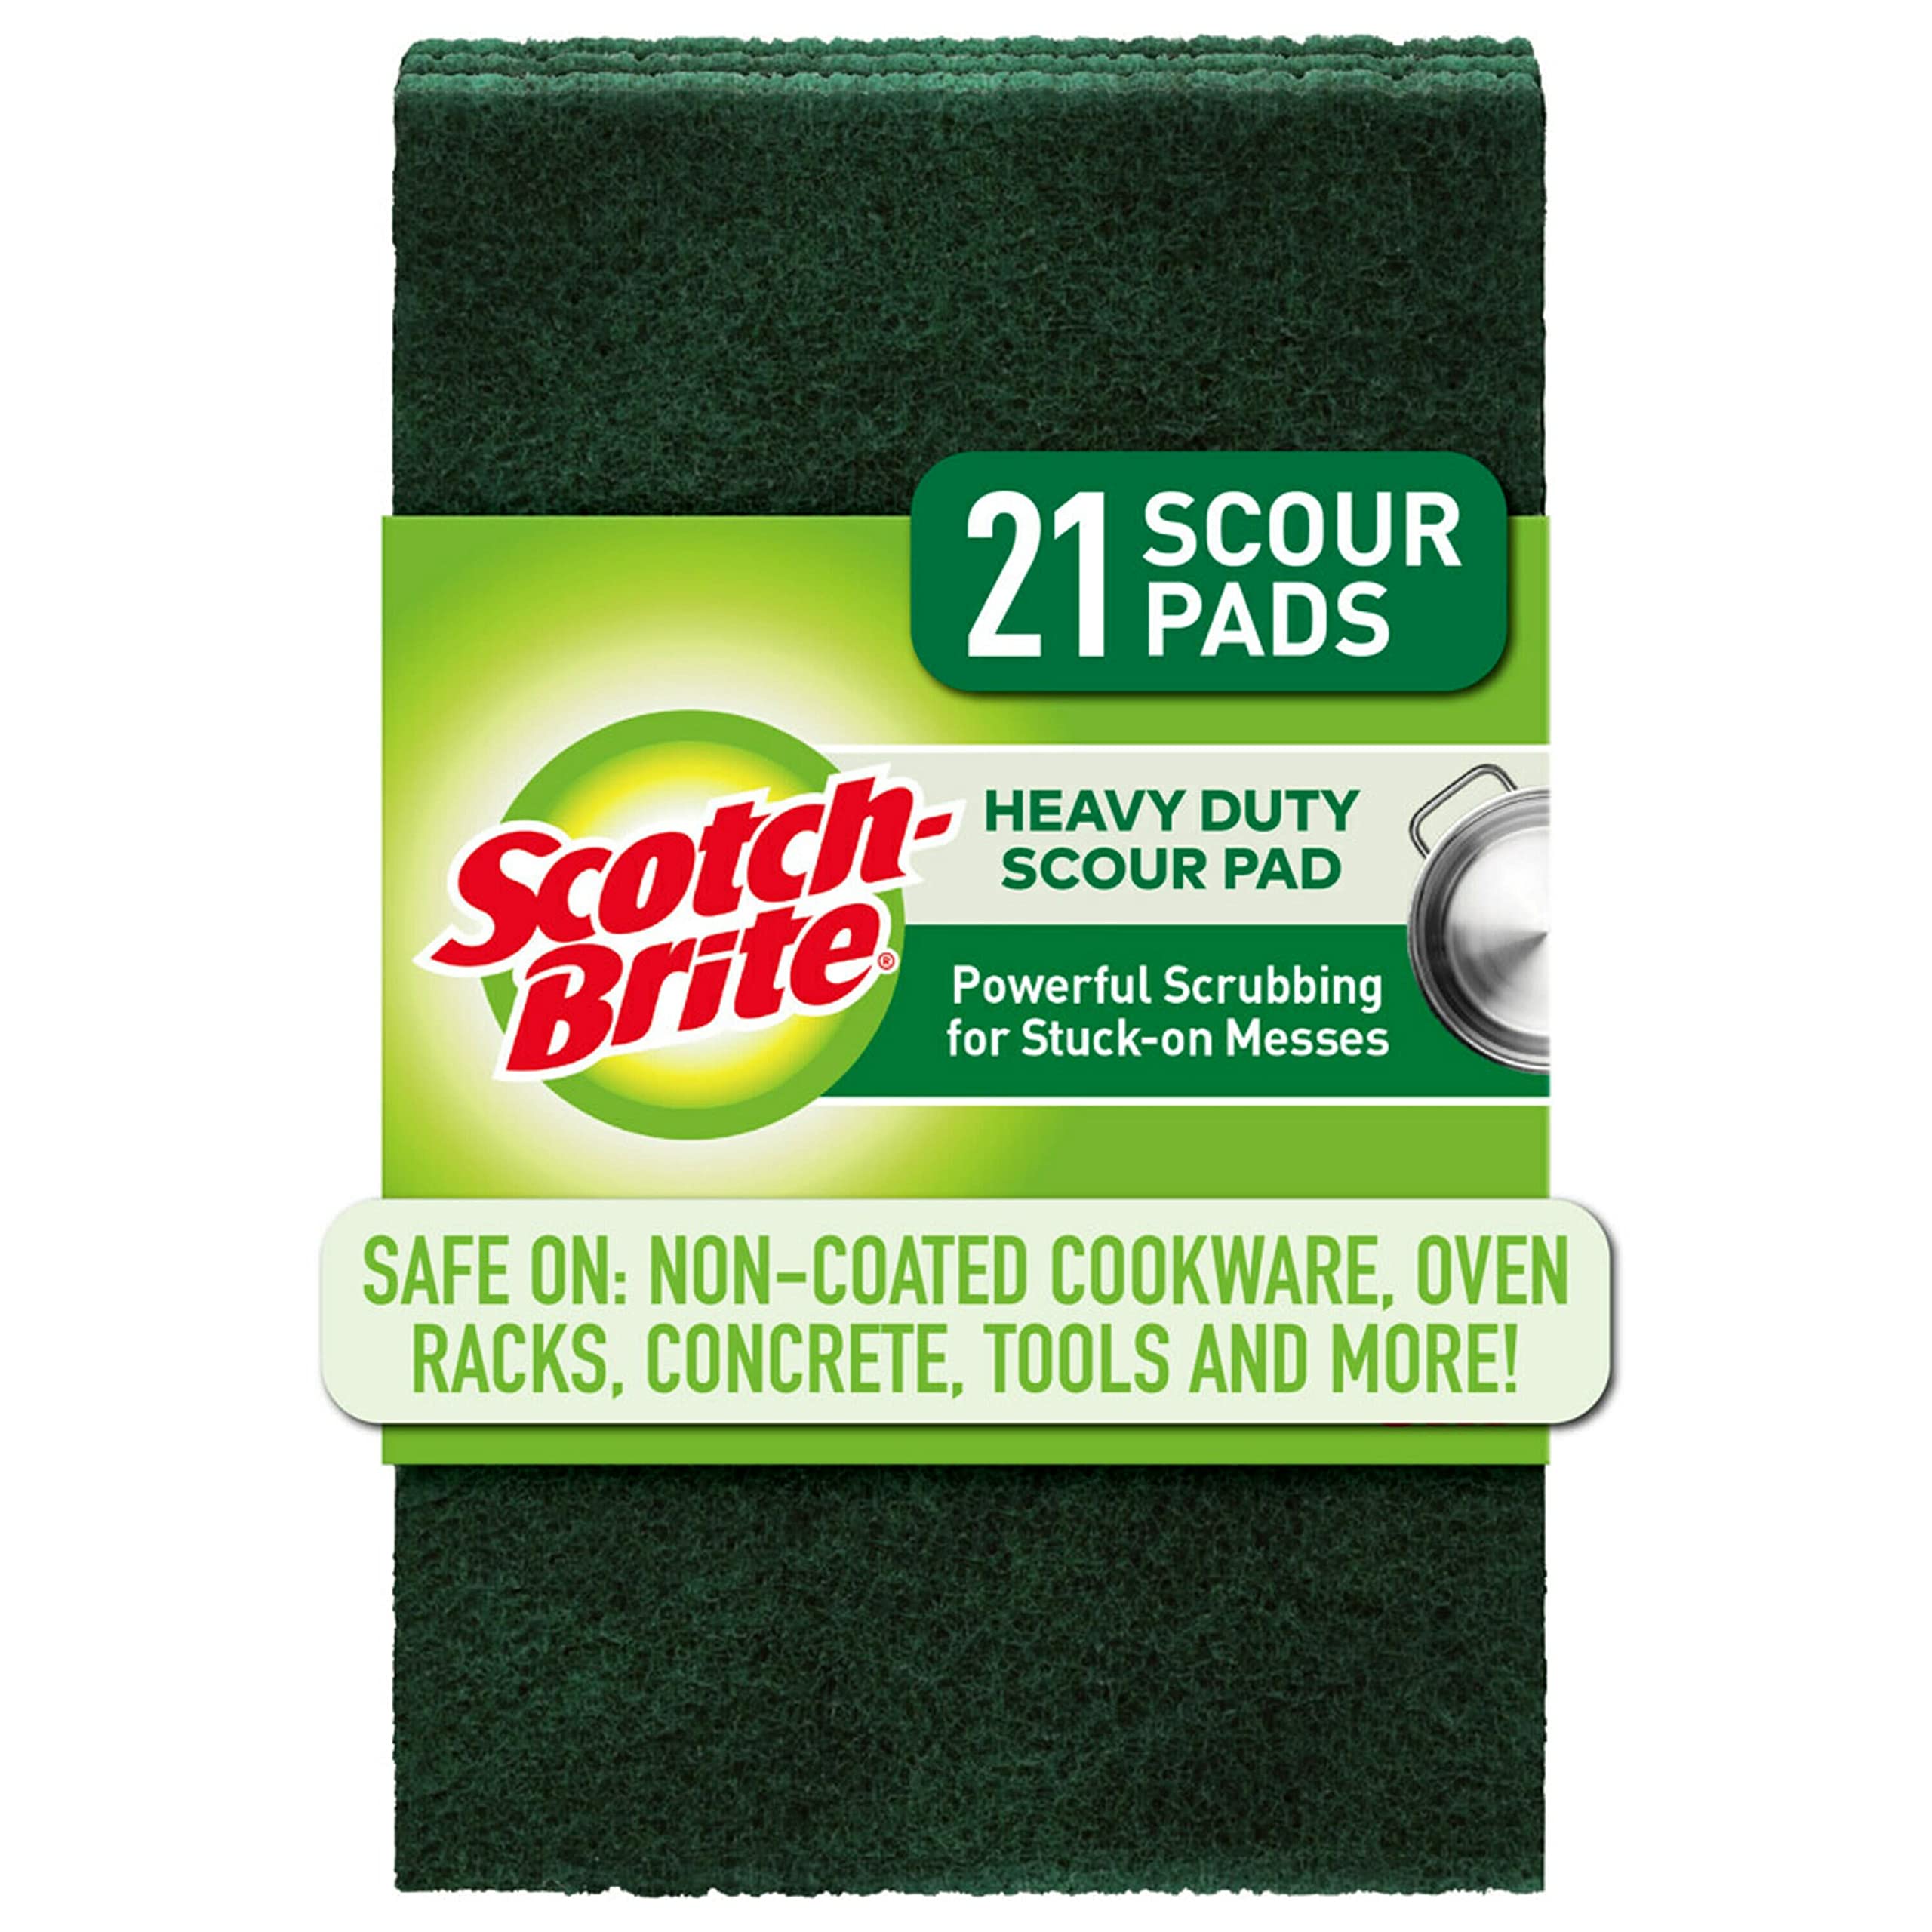 Scotch-Brite Heavy Duty Scour Pads, Scouring Pads for Kitchen and Dish Cleaning, 21 Pads